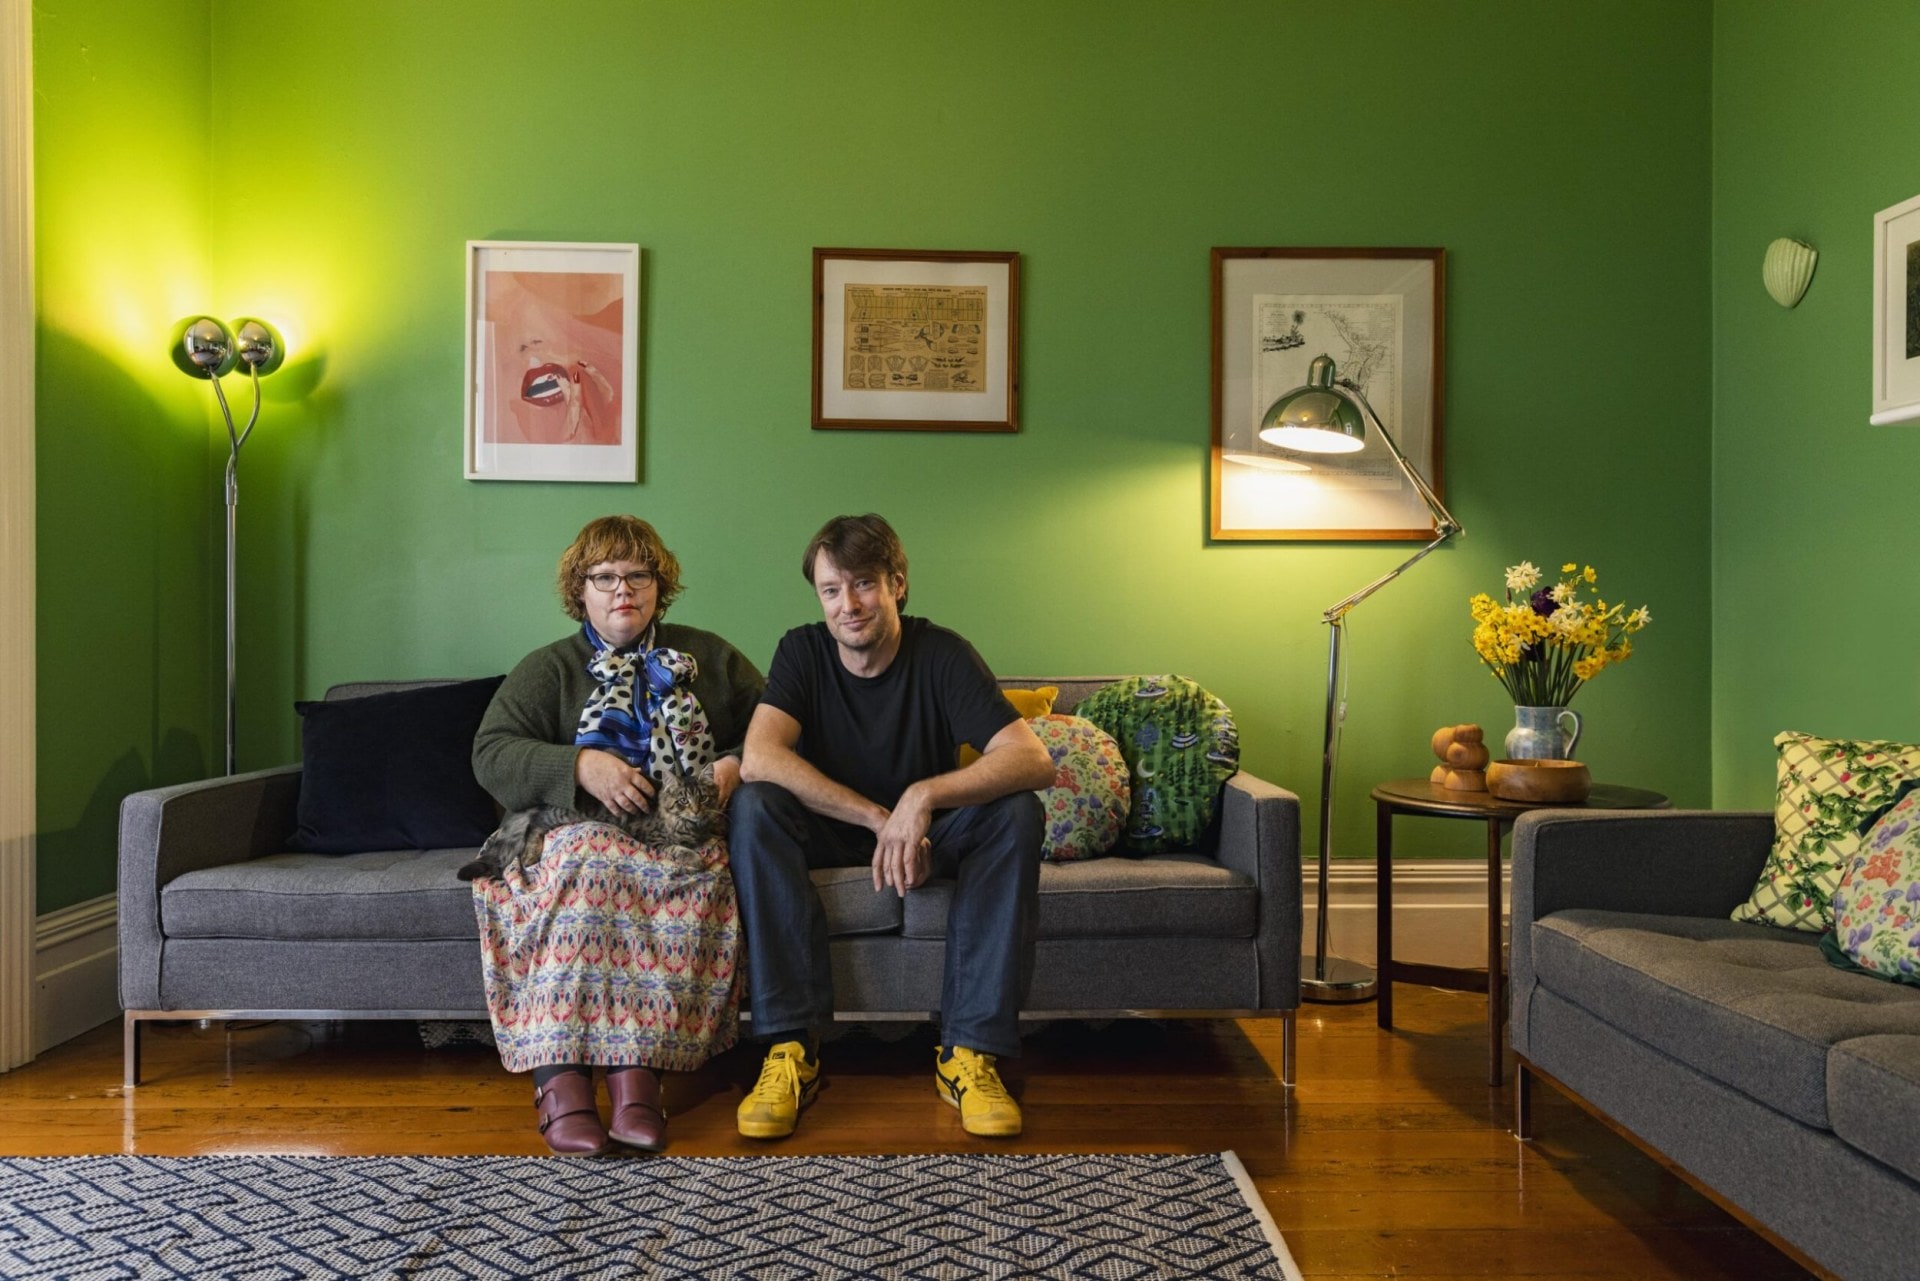 Faith Walmsley and husband Nicholas Cole sit on a grey couch in front of a green wall